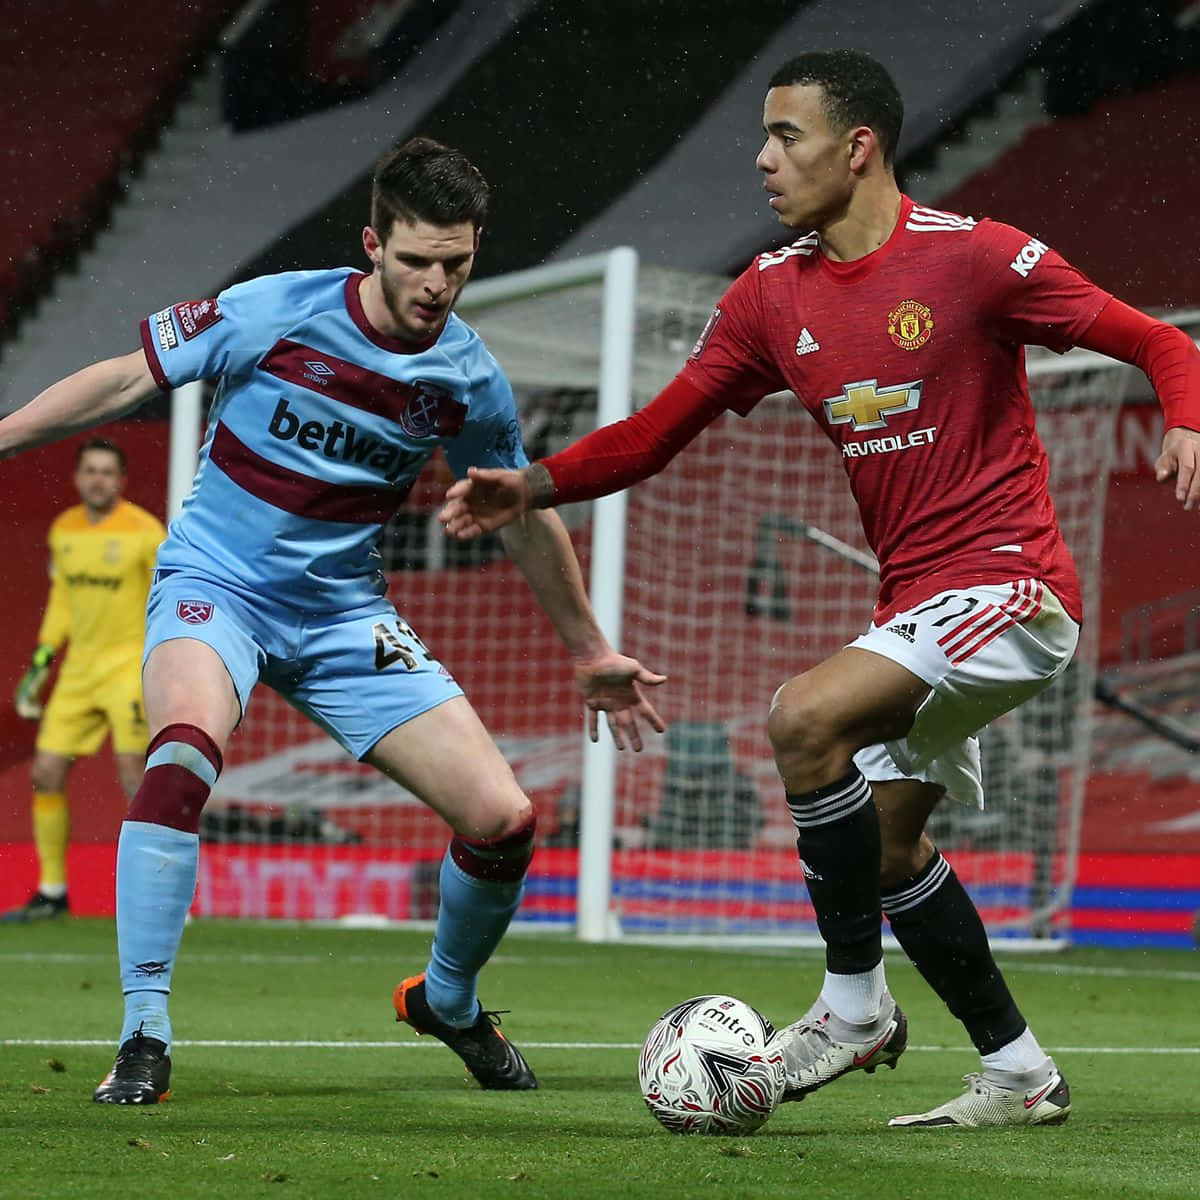 Manchester United Rising Star Mason Greenwood in Action